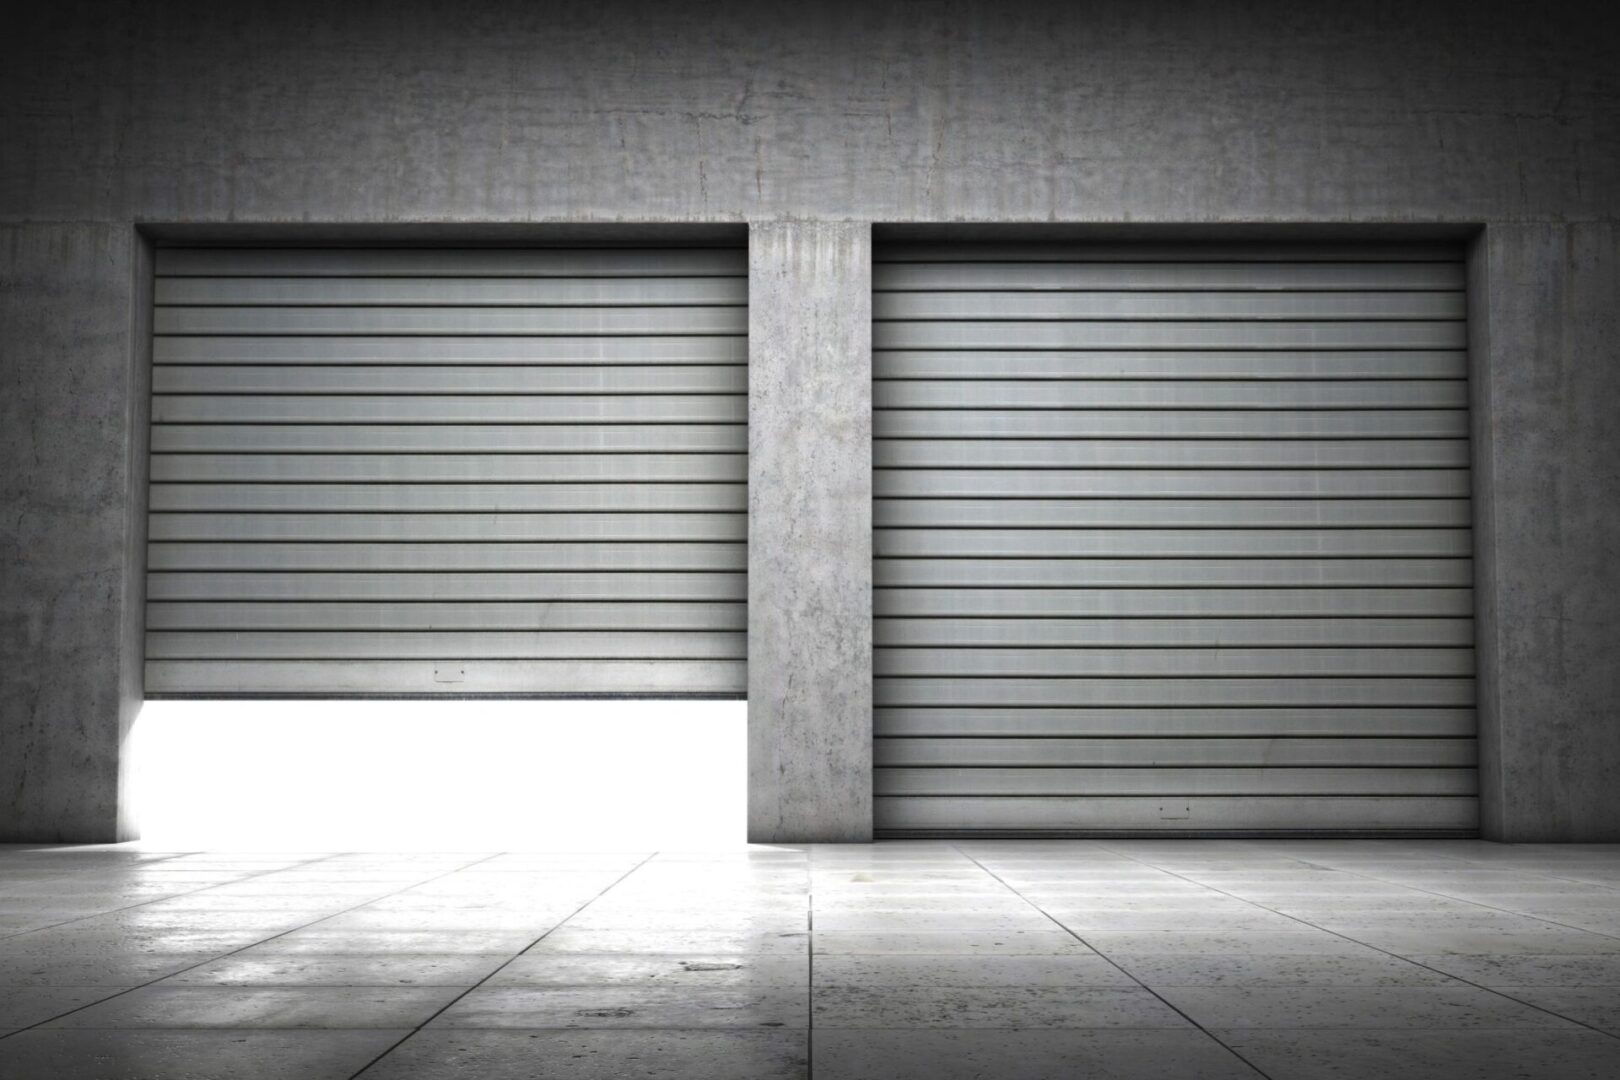 Two garage doors in a building with no one inside.